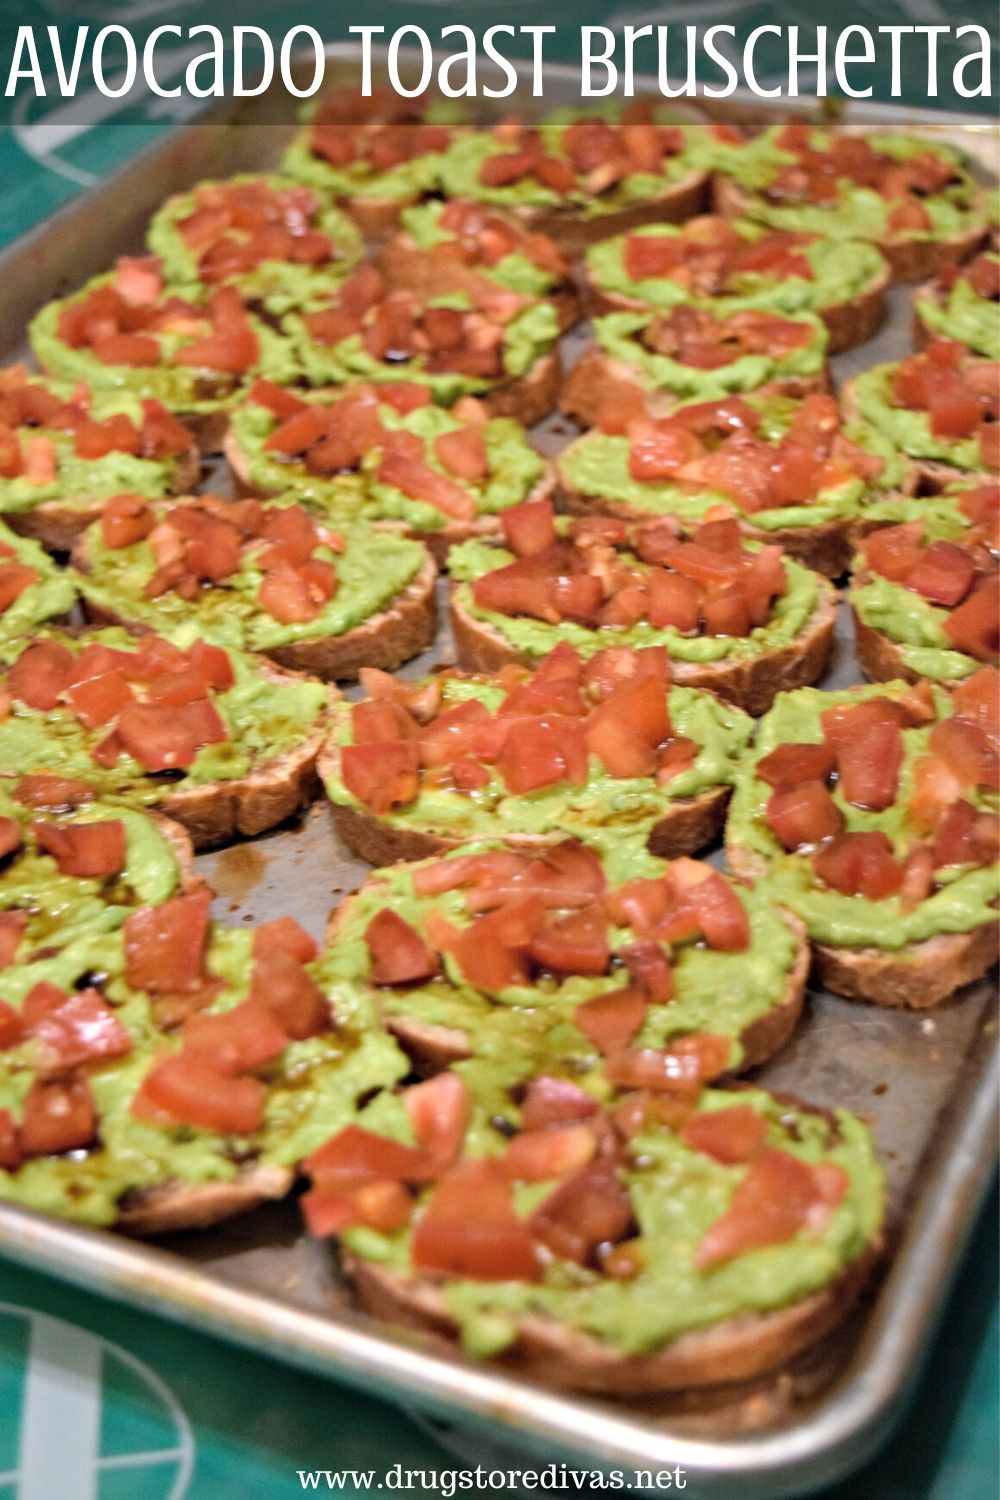 Avocado Toast Bruschetta is the perfect party appetizer. It's vegan too! Find out how to make it at www.drugstoredivas.net.